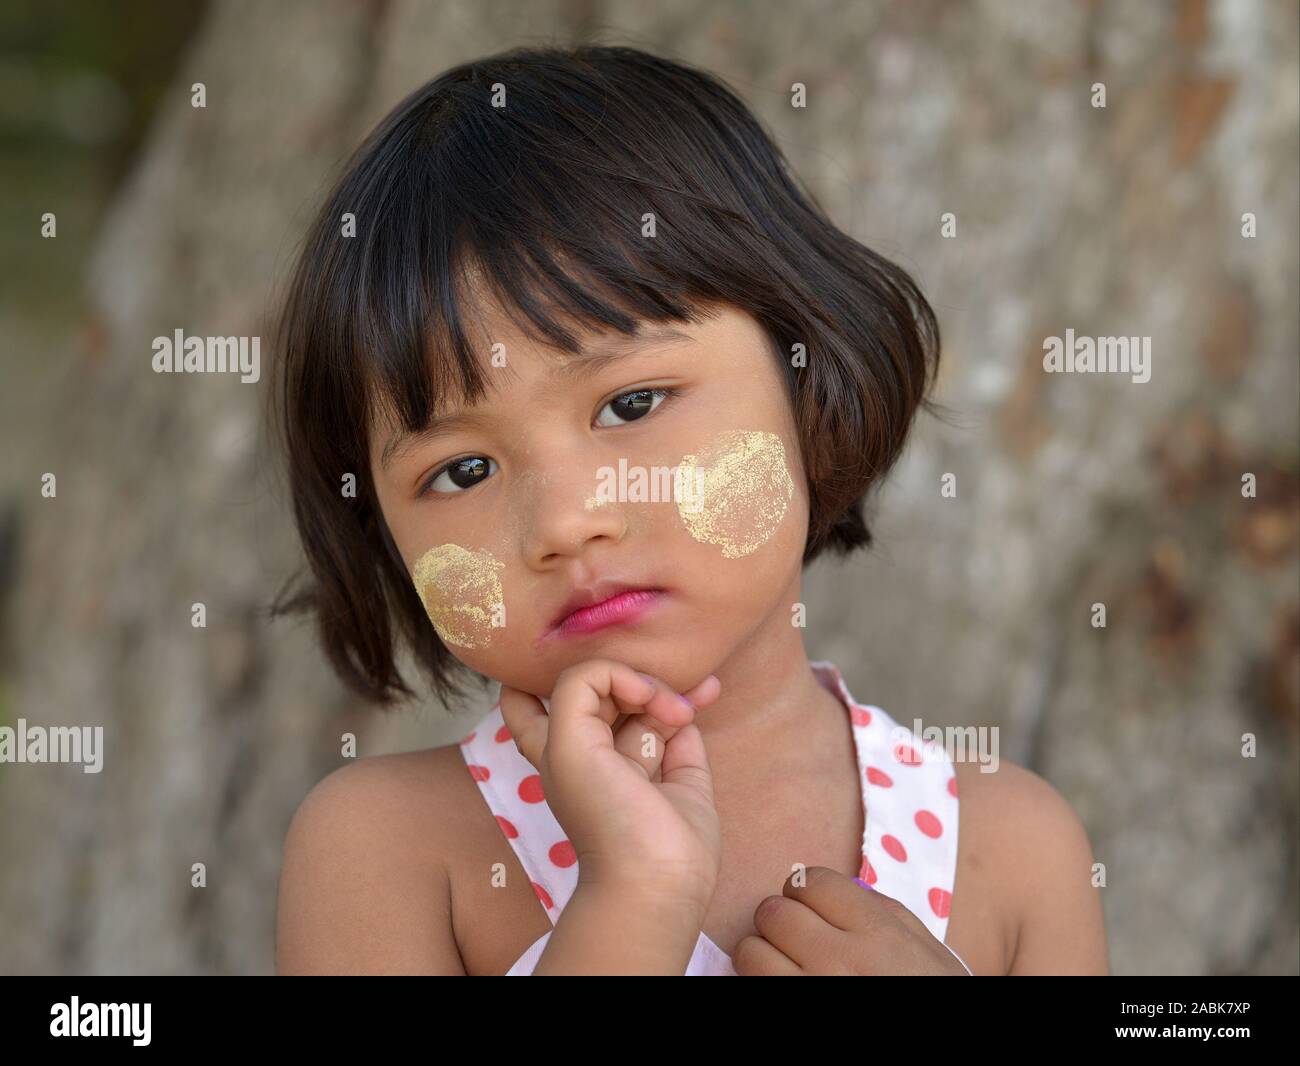 Cute little Burmese girl with patches of traditional thanaka face cosmetic on her cheeks poses for the camera. Stock Photo